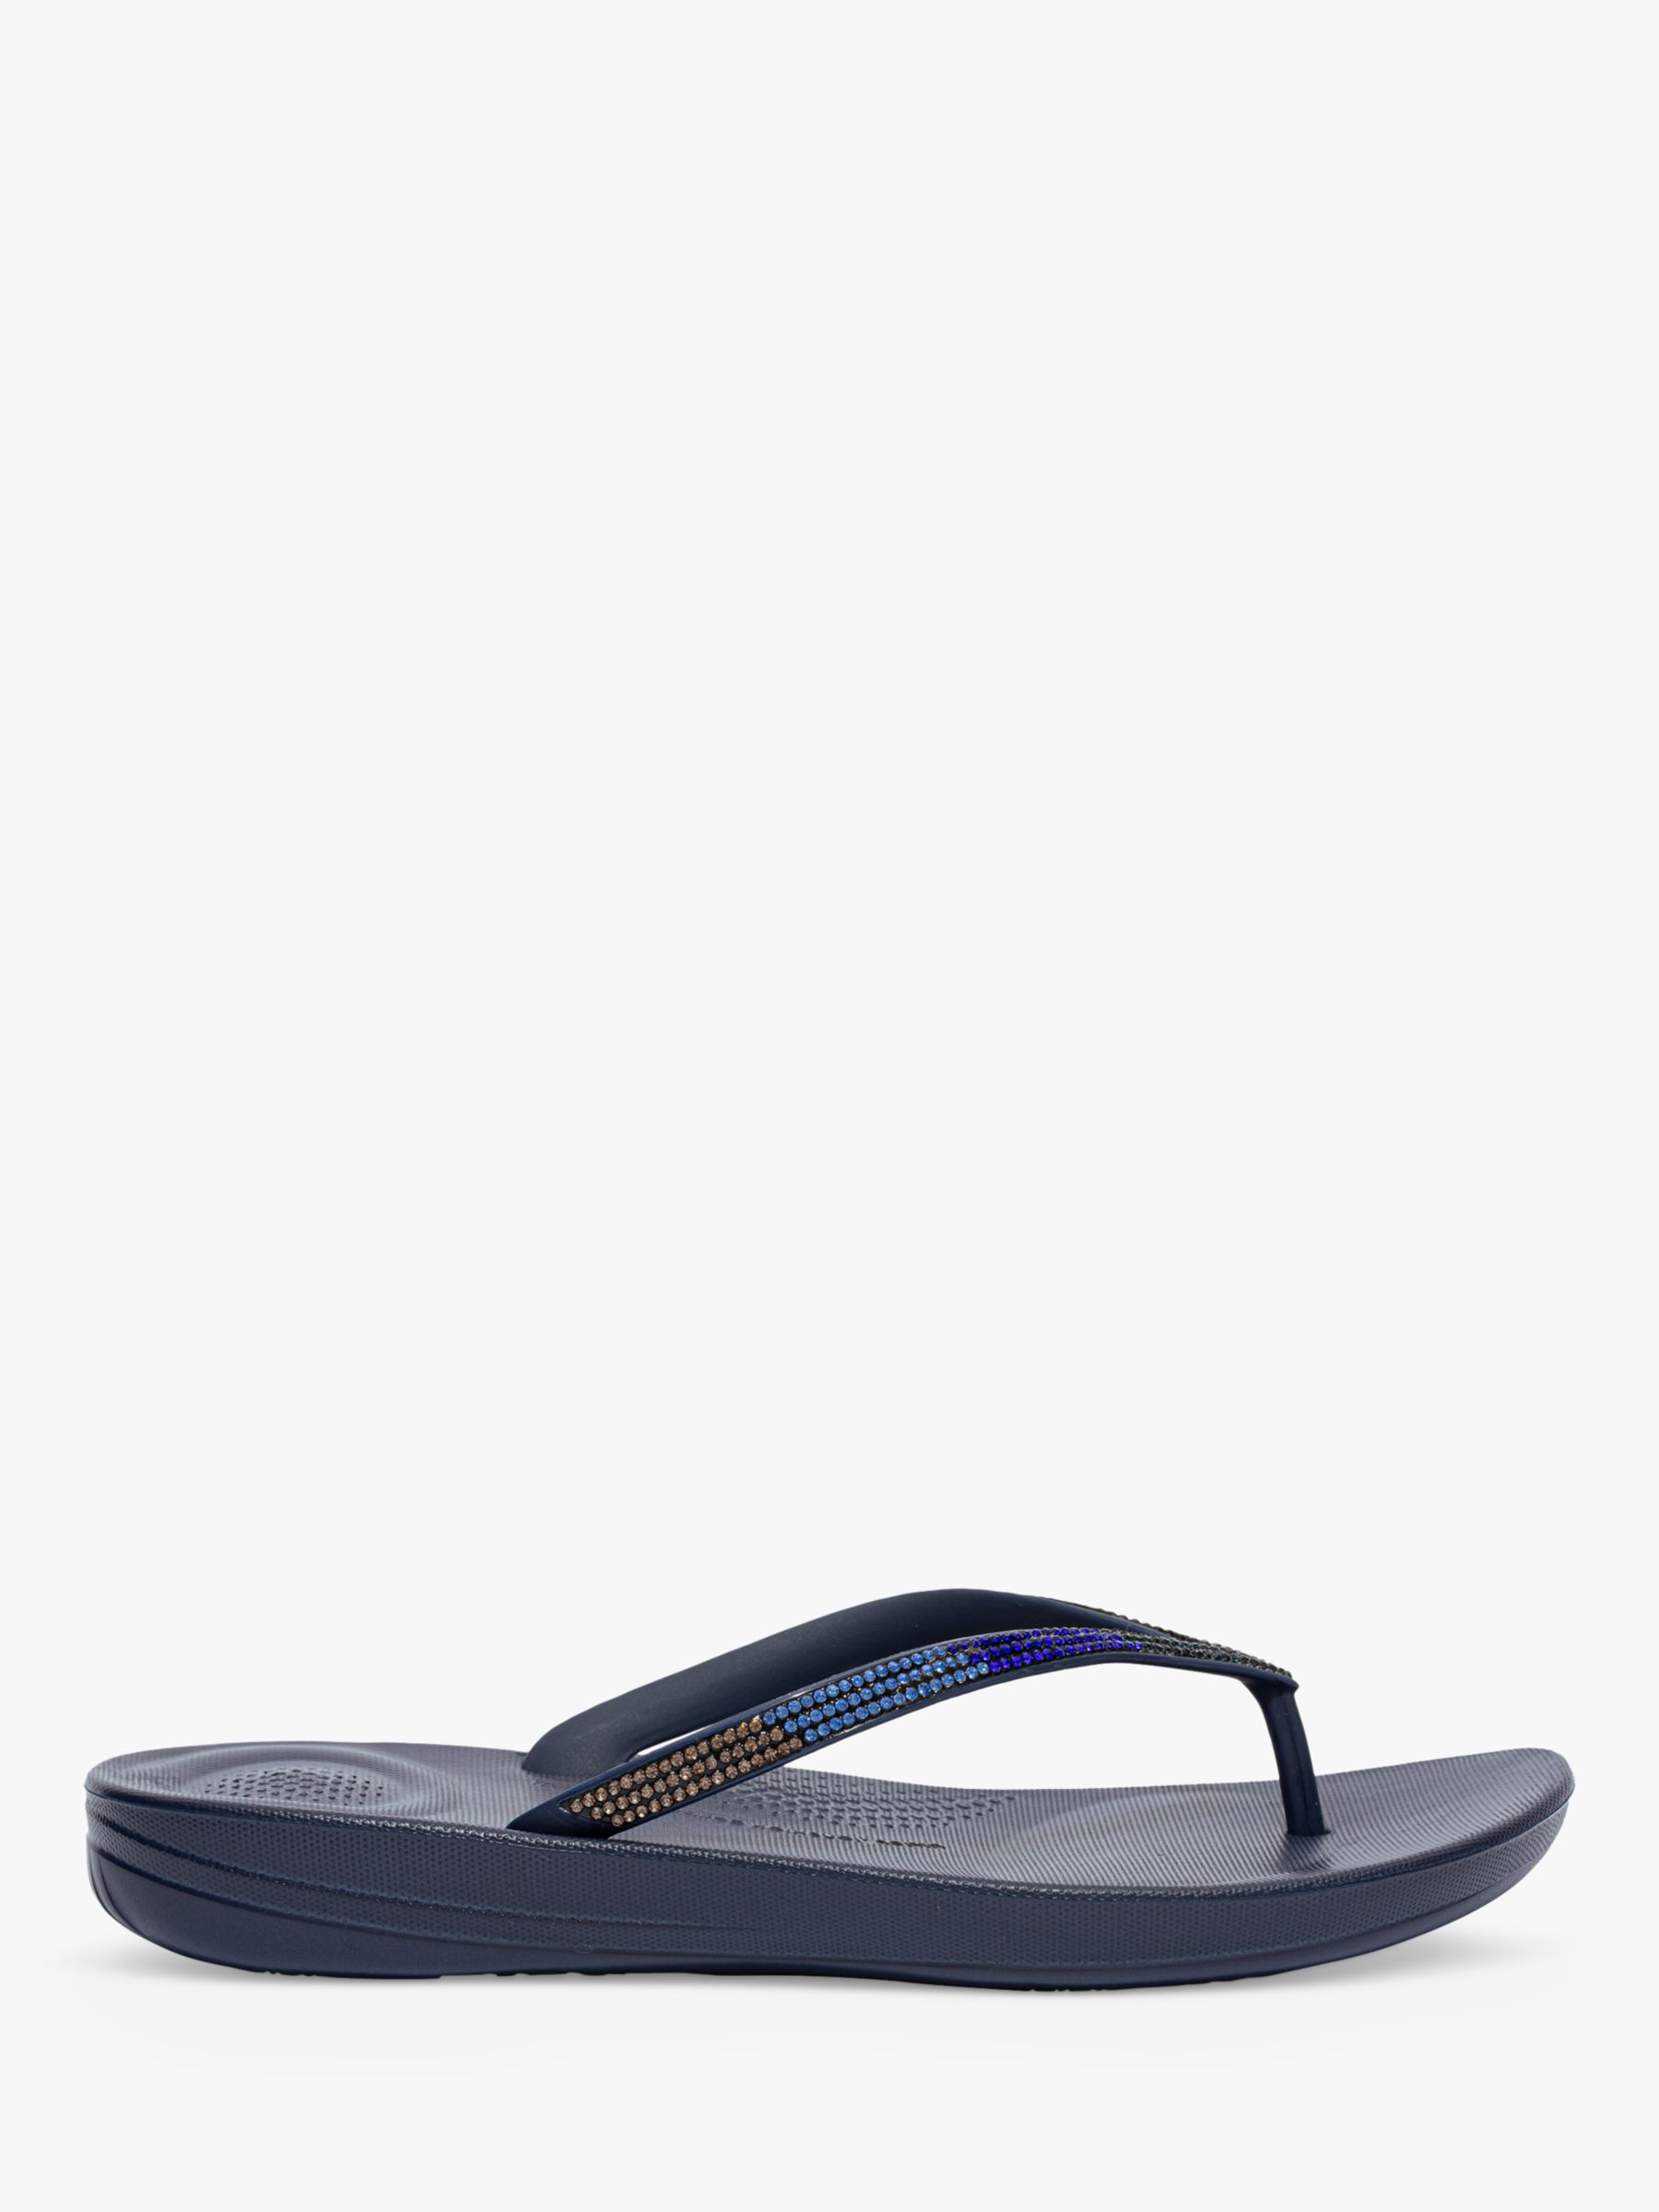 FitFlop IQushion Flip Flops, Navy at John Lewis & Partners